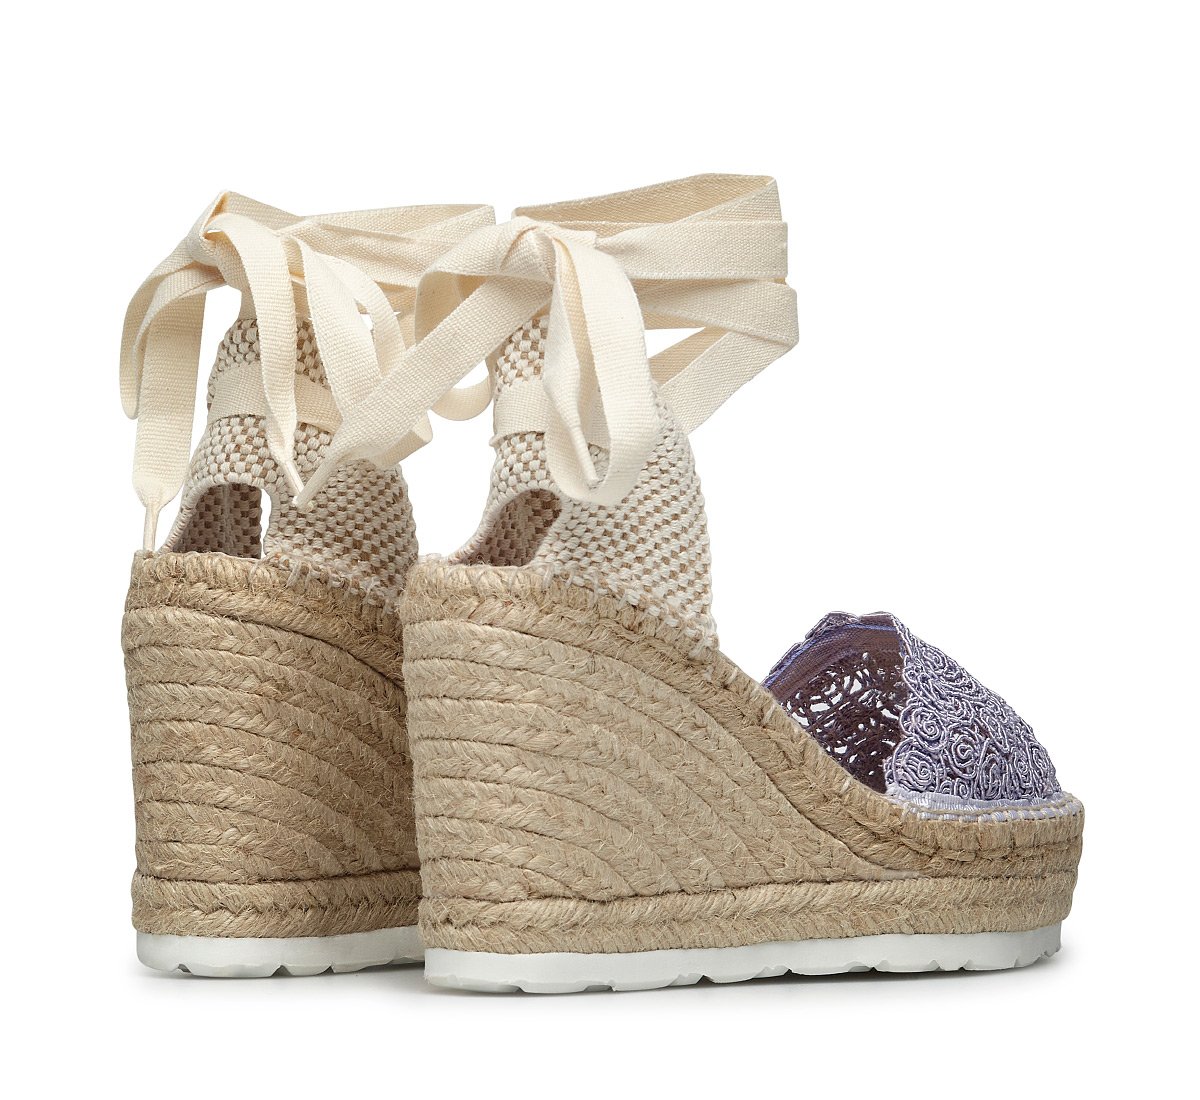 Embroidered satin wedge espadrilles